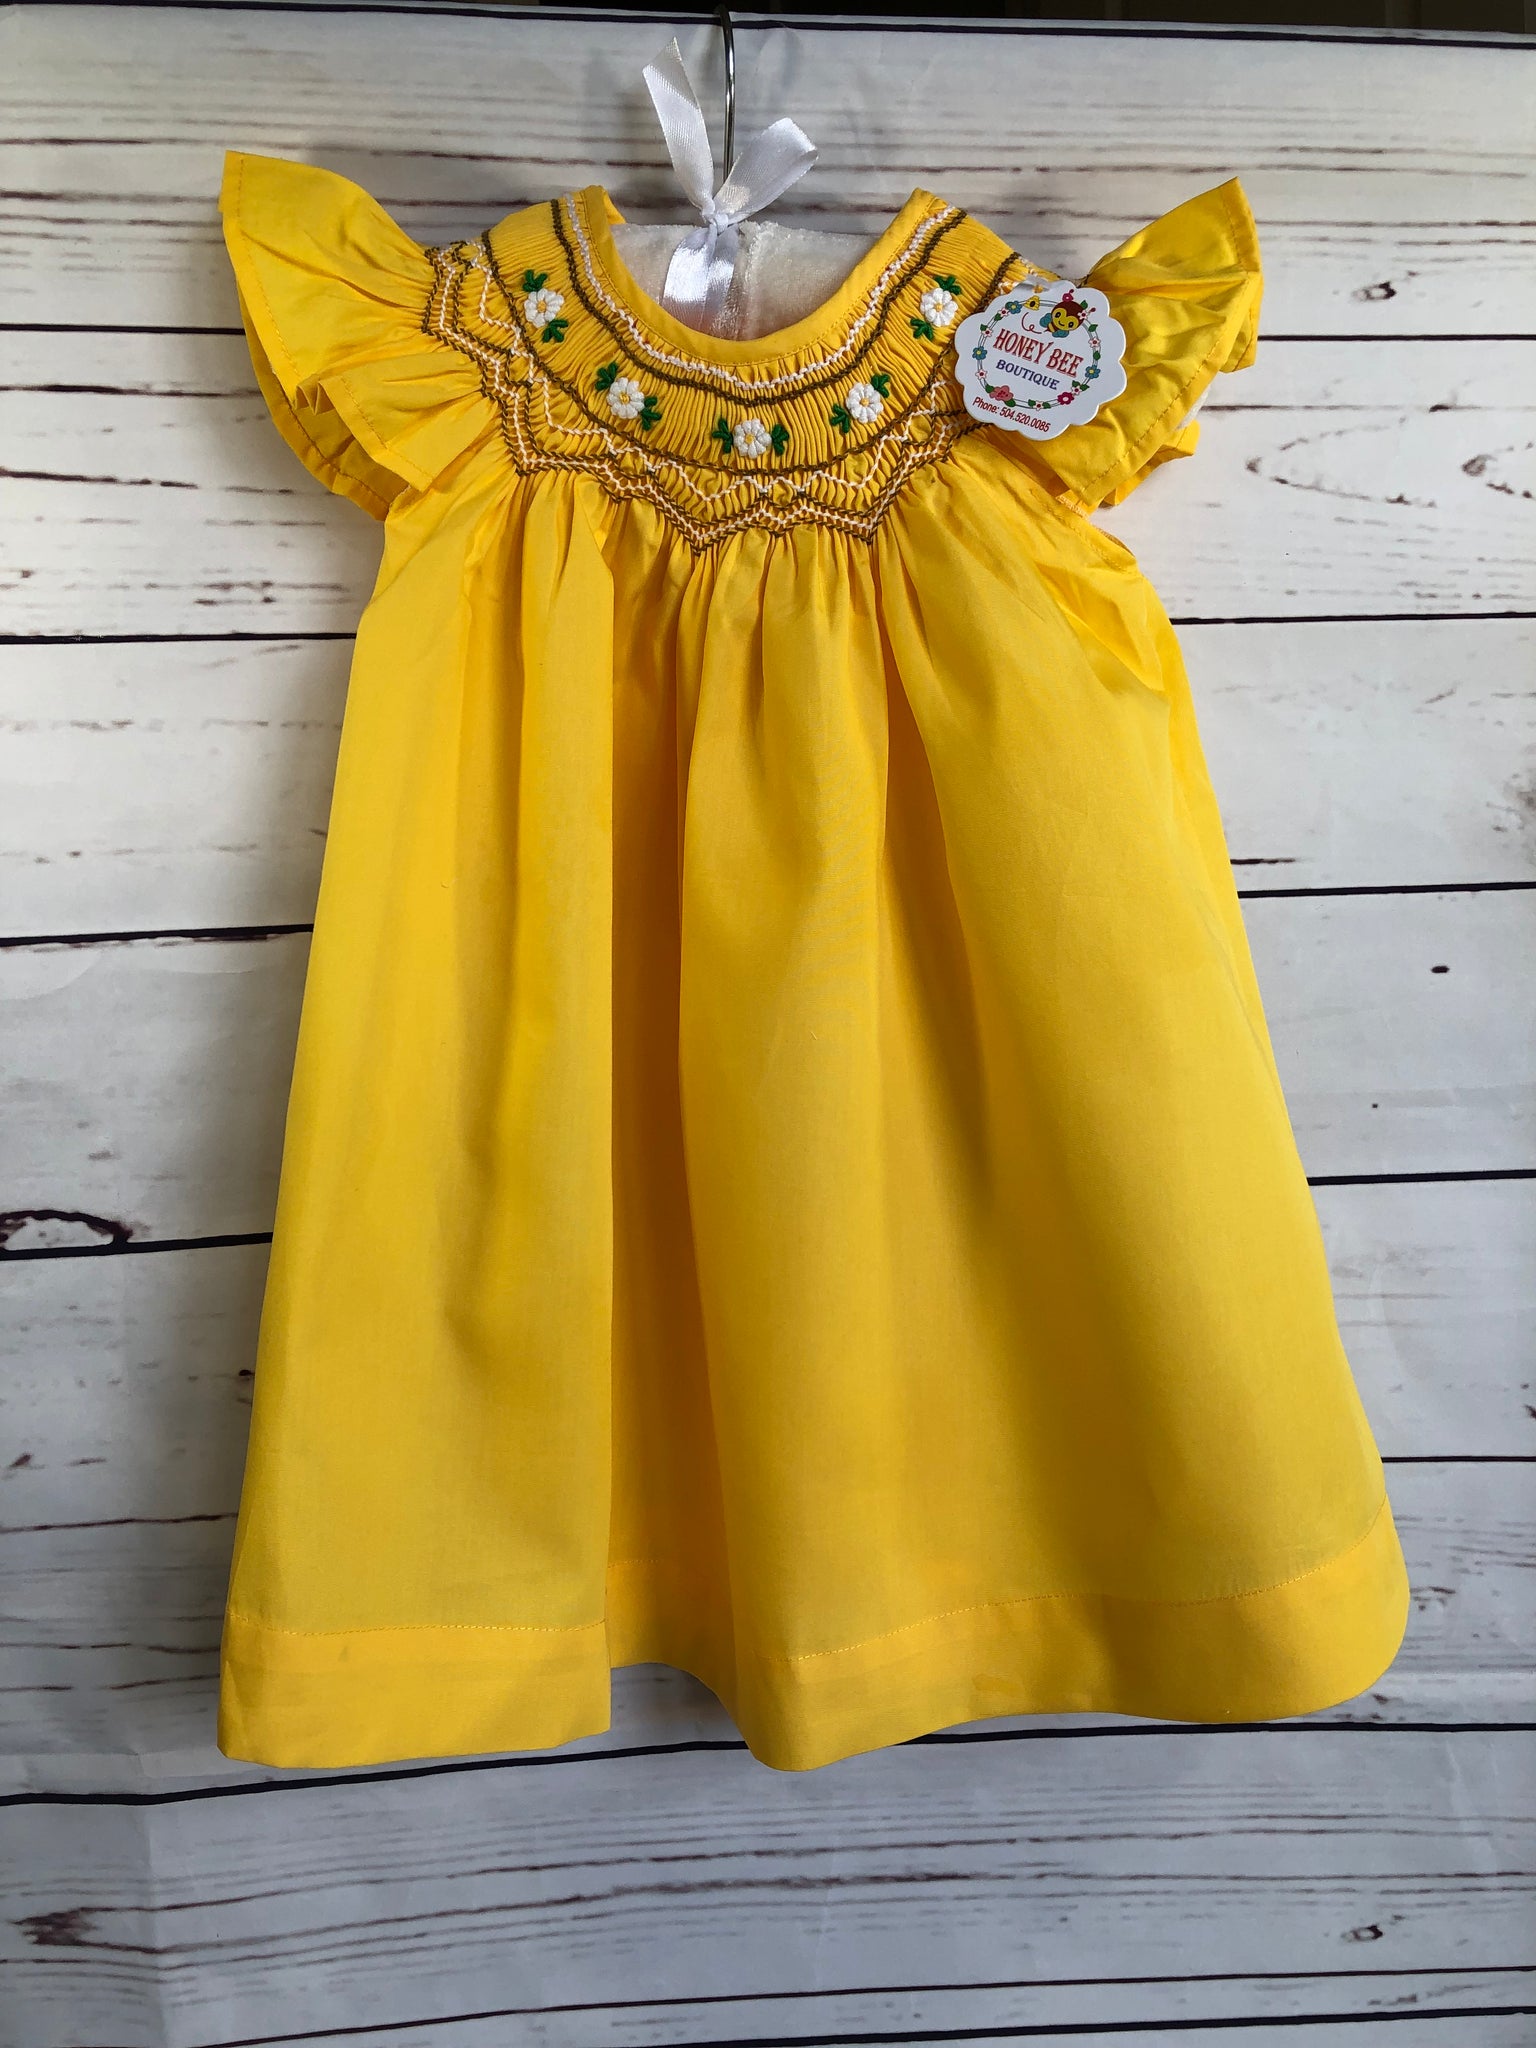 Bright yellow dress with white flowers and brown smocked details